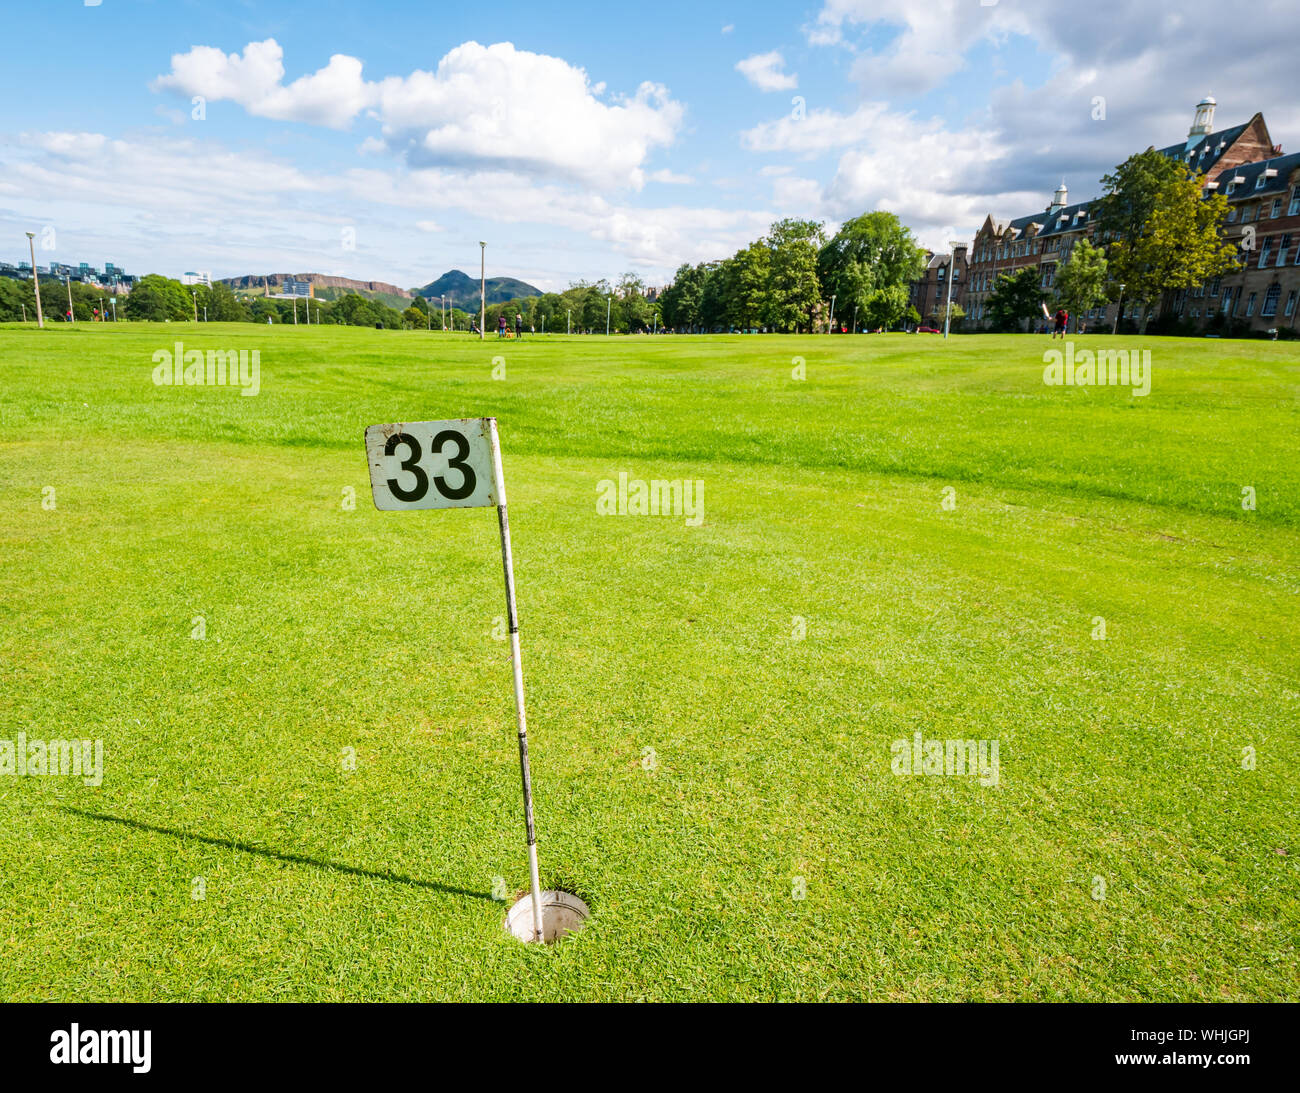 Putting green golf hole with number 33, The Meadows, Edinburgh, Scotland, UK Stock Photo